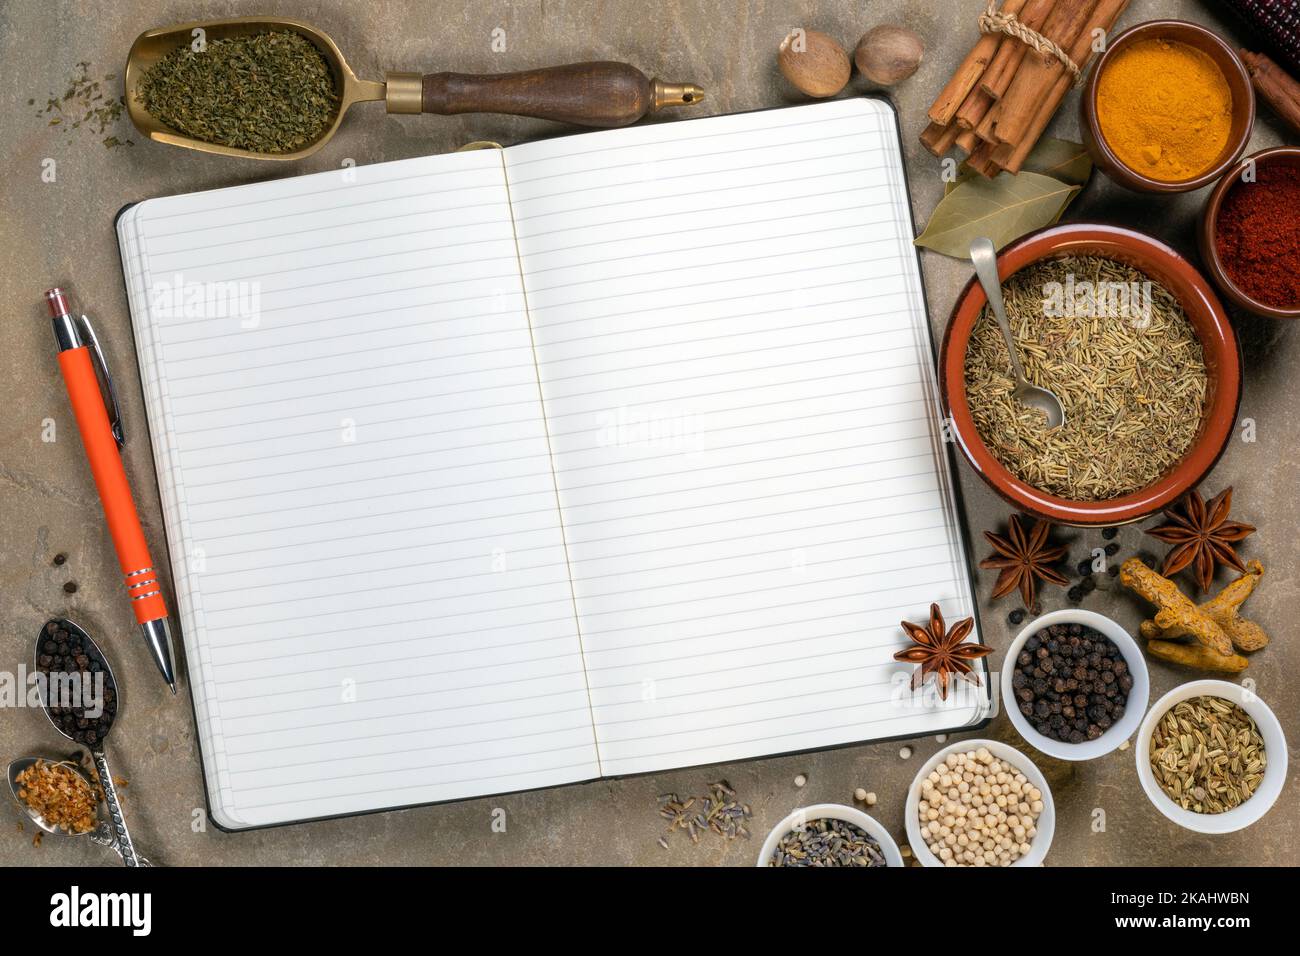 Cooking spices used to add flavor and seasoning with an open recipe book with blank pages - space for text. Stock Photo